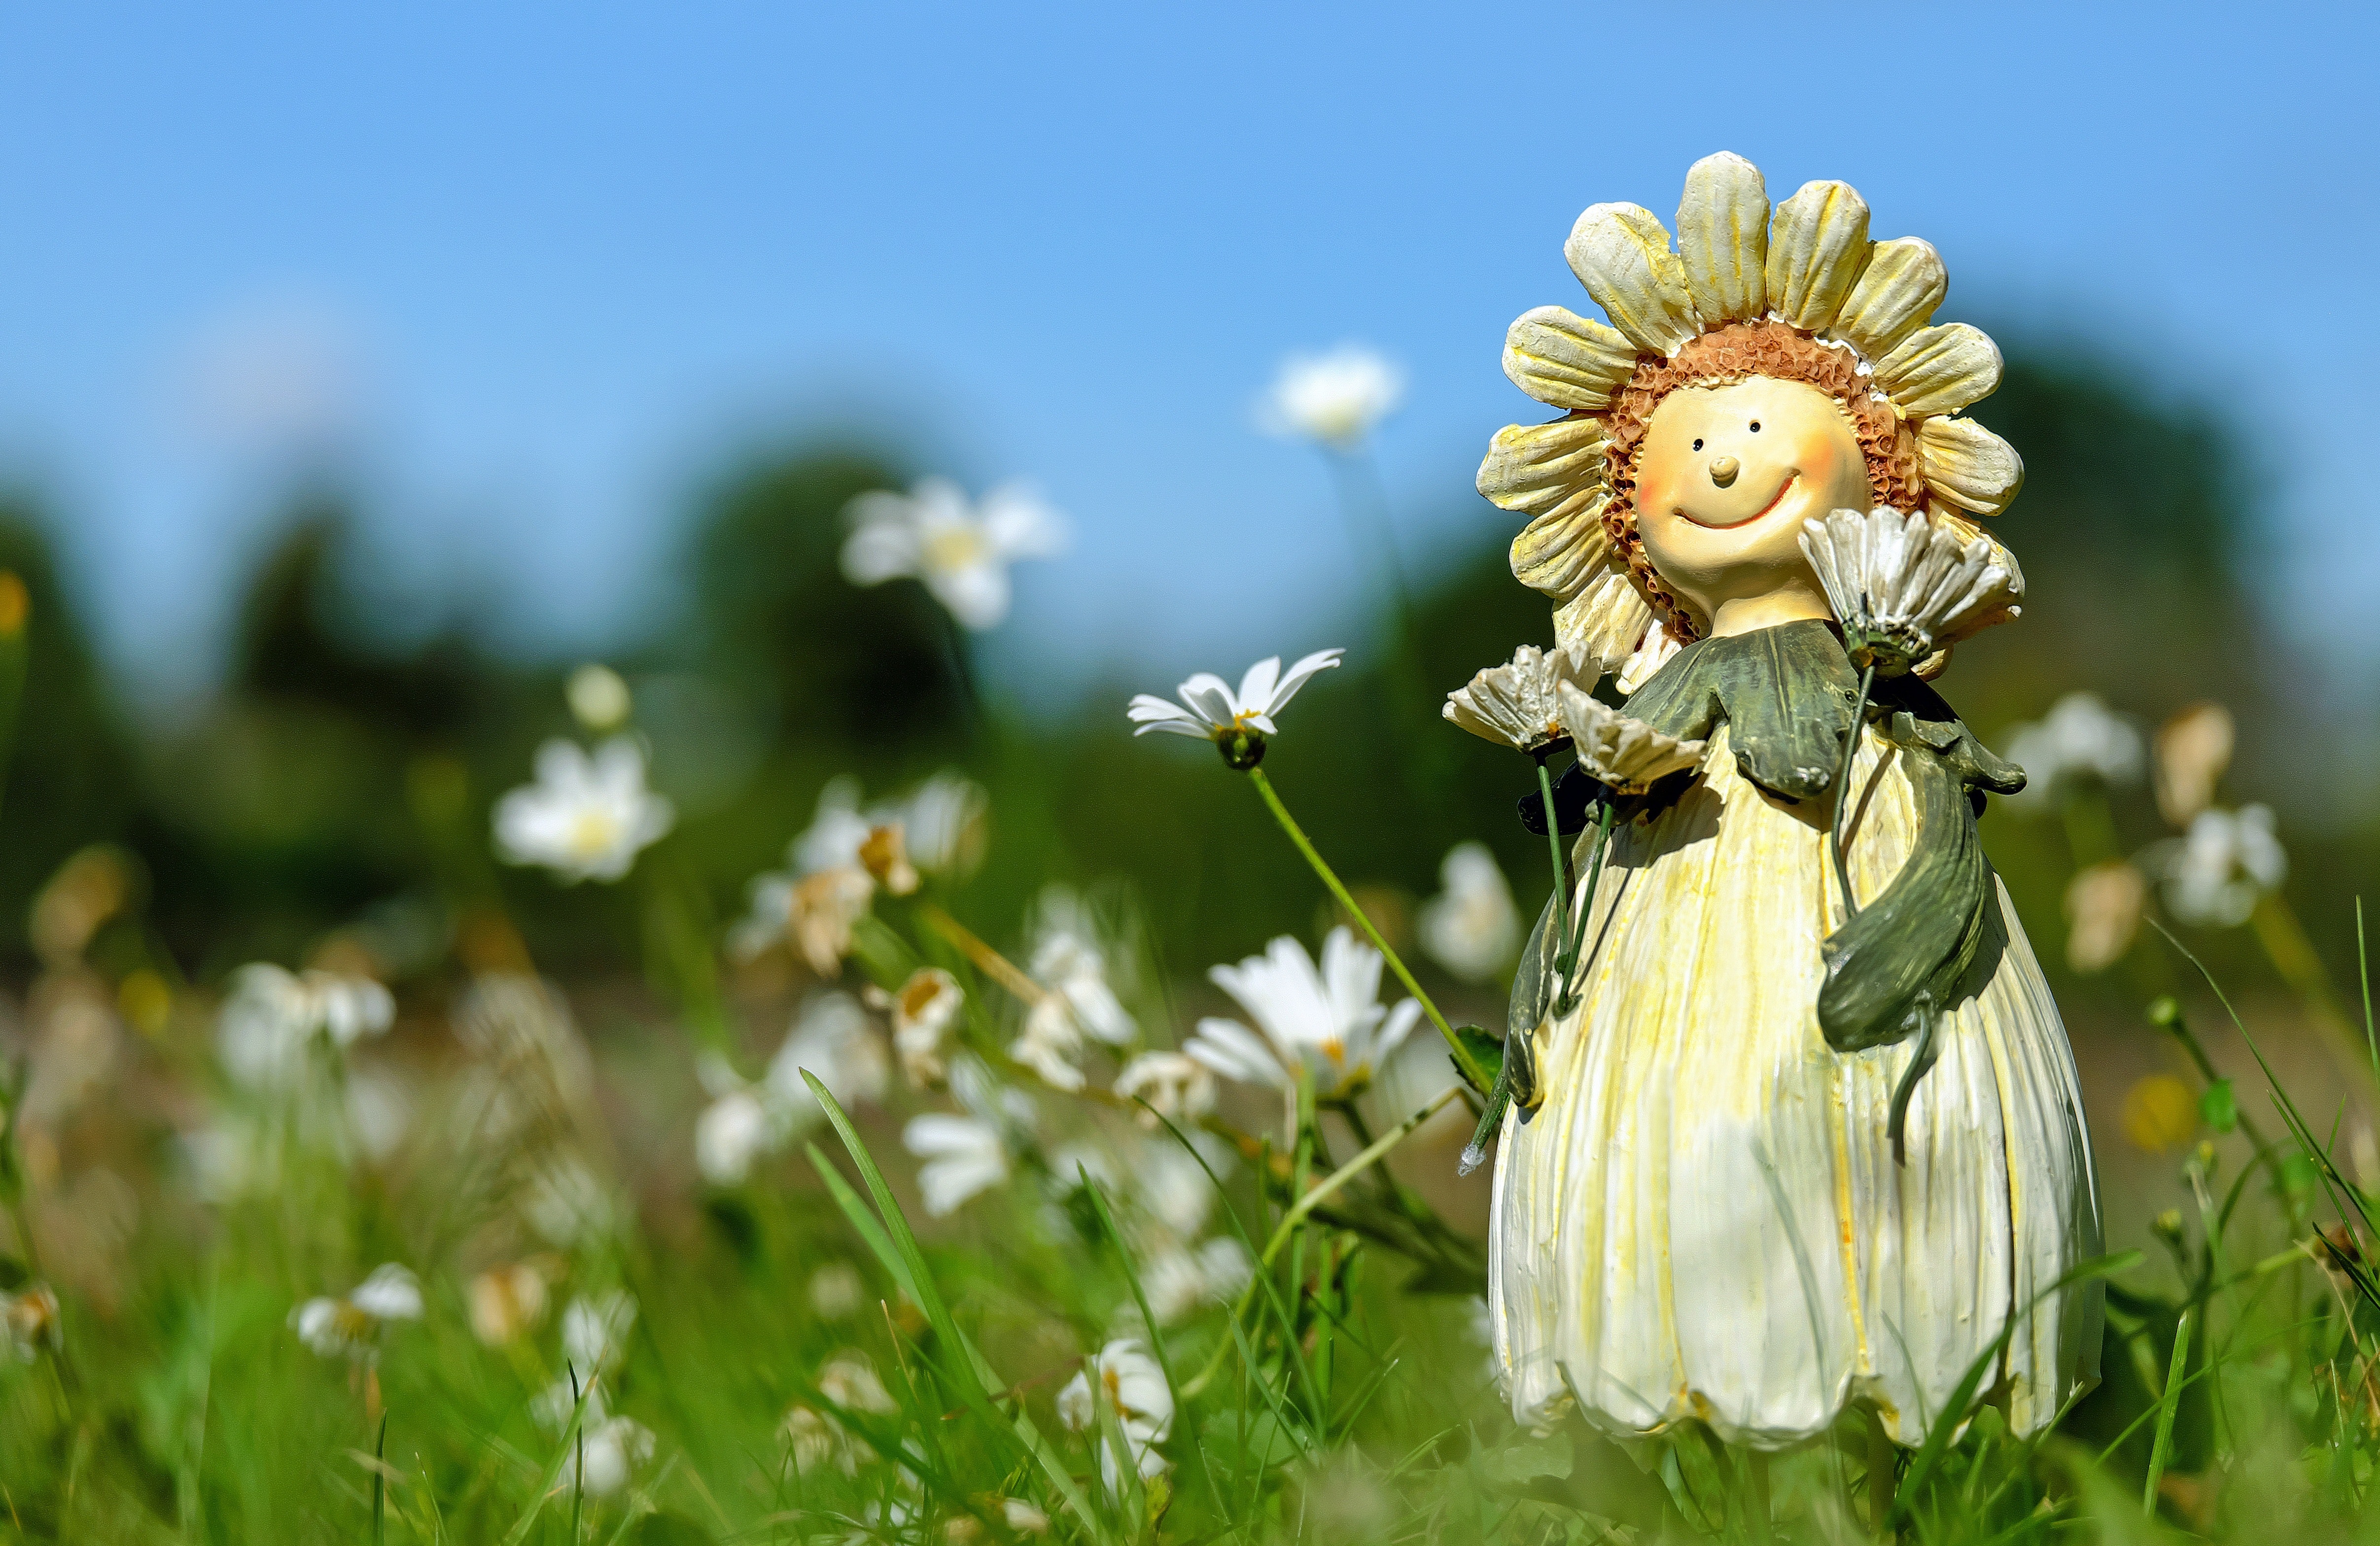 White Daisy Flower Field With Plush Toy during Daytime, Bloom, Blossom, Field, Figurine, HQ Photo